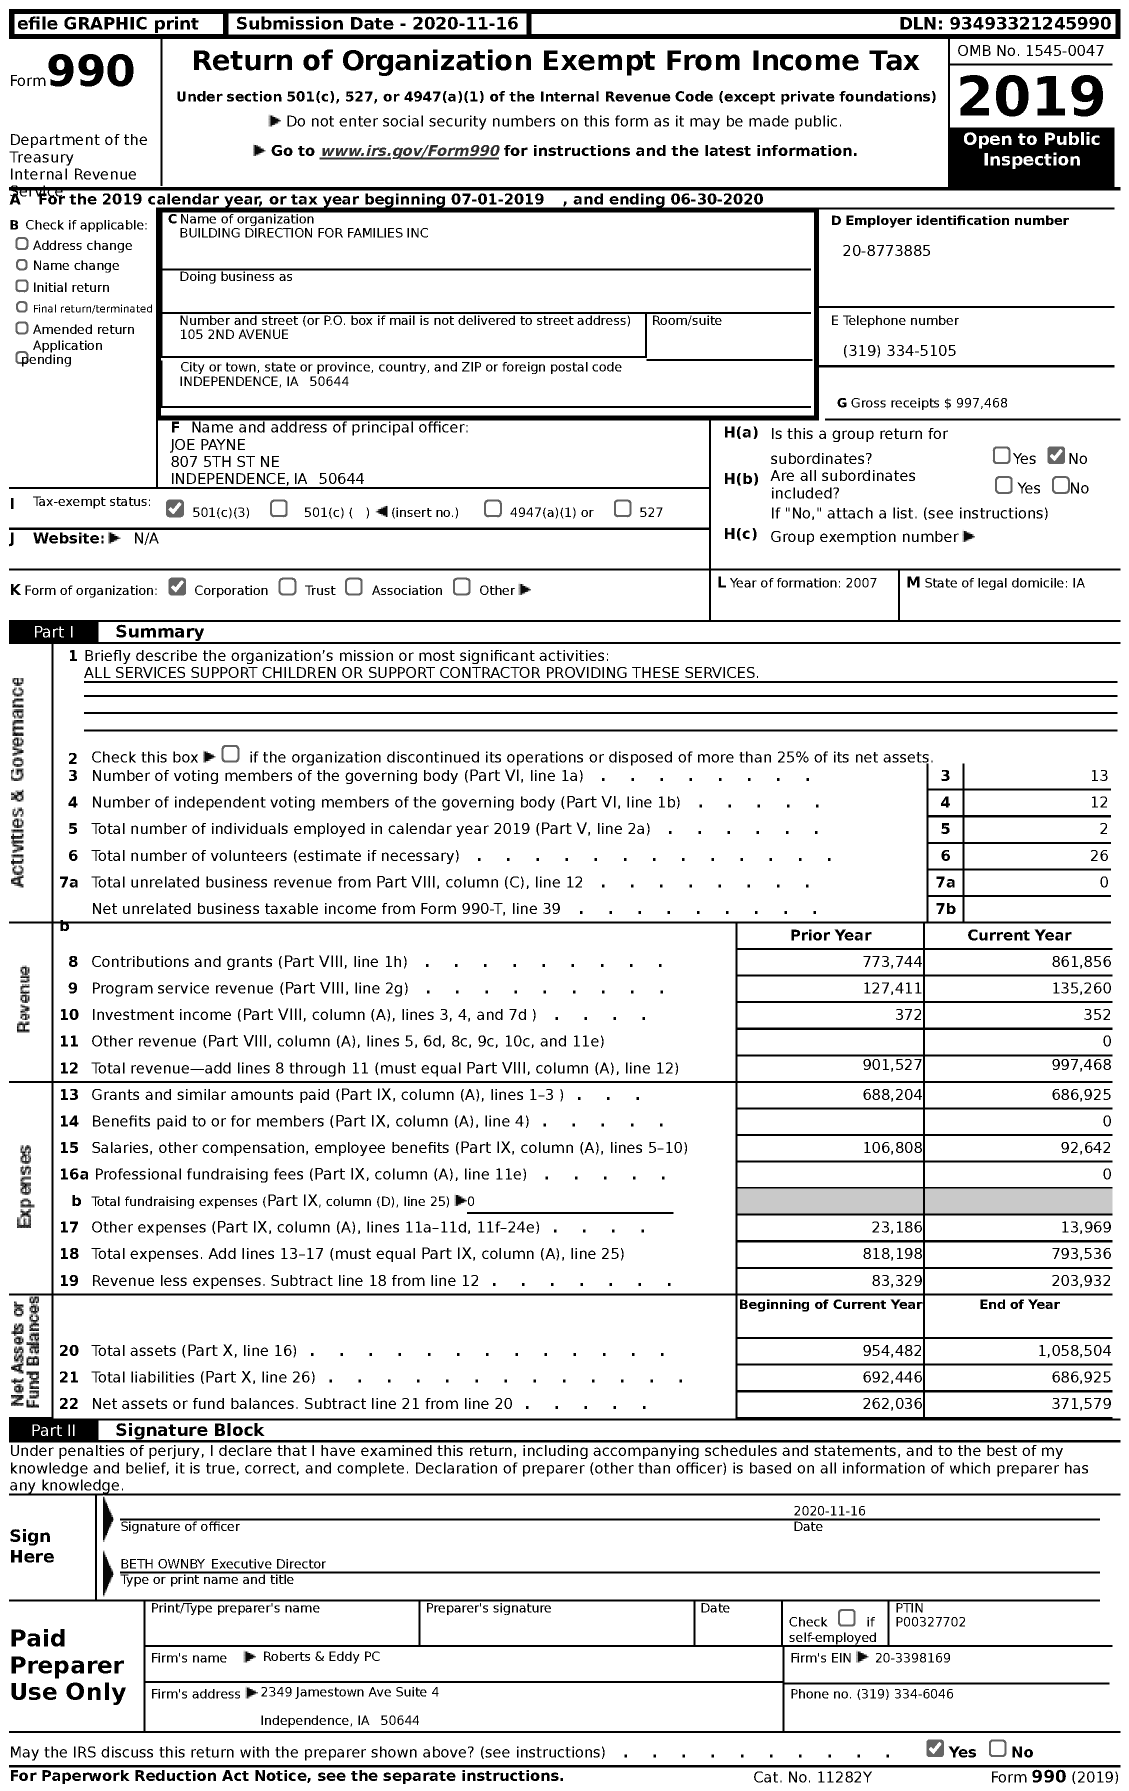 Image of first page of 2019 Form 990 for Building Direction for Families